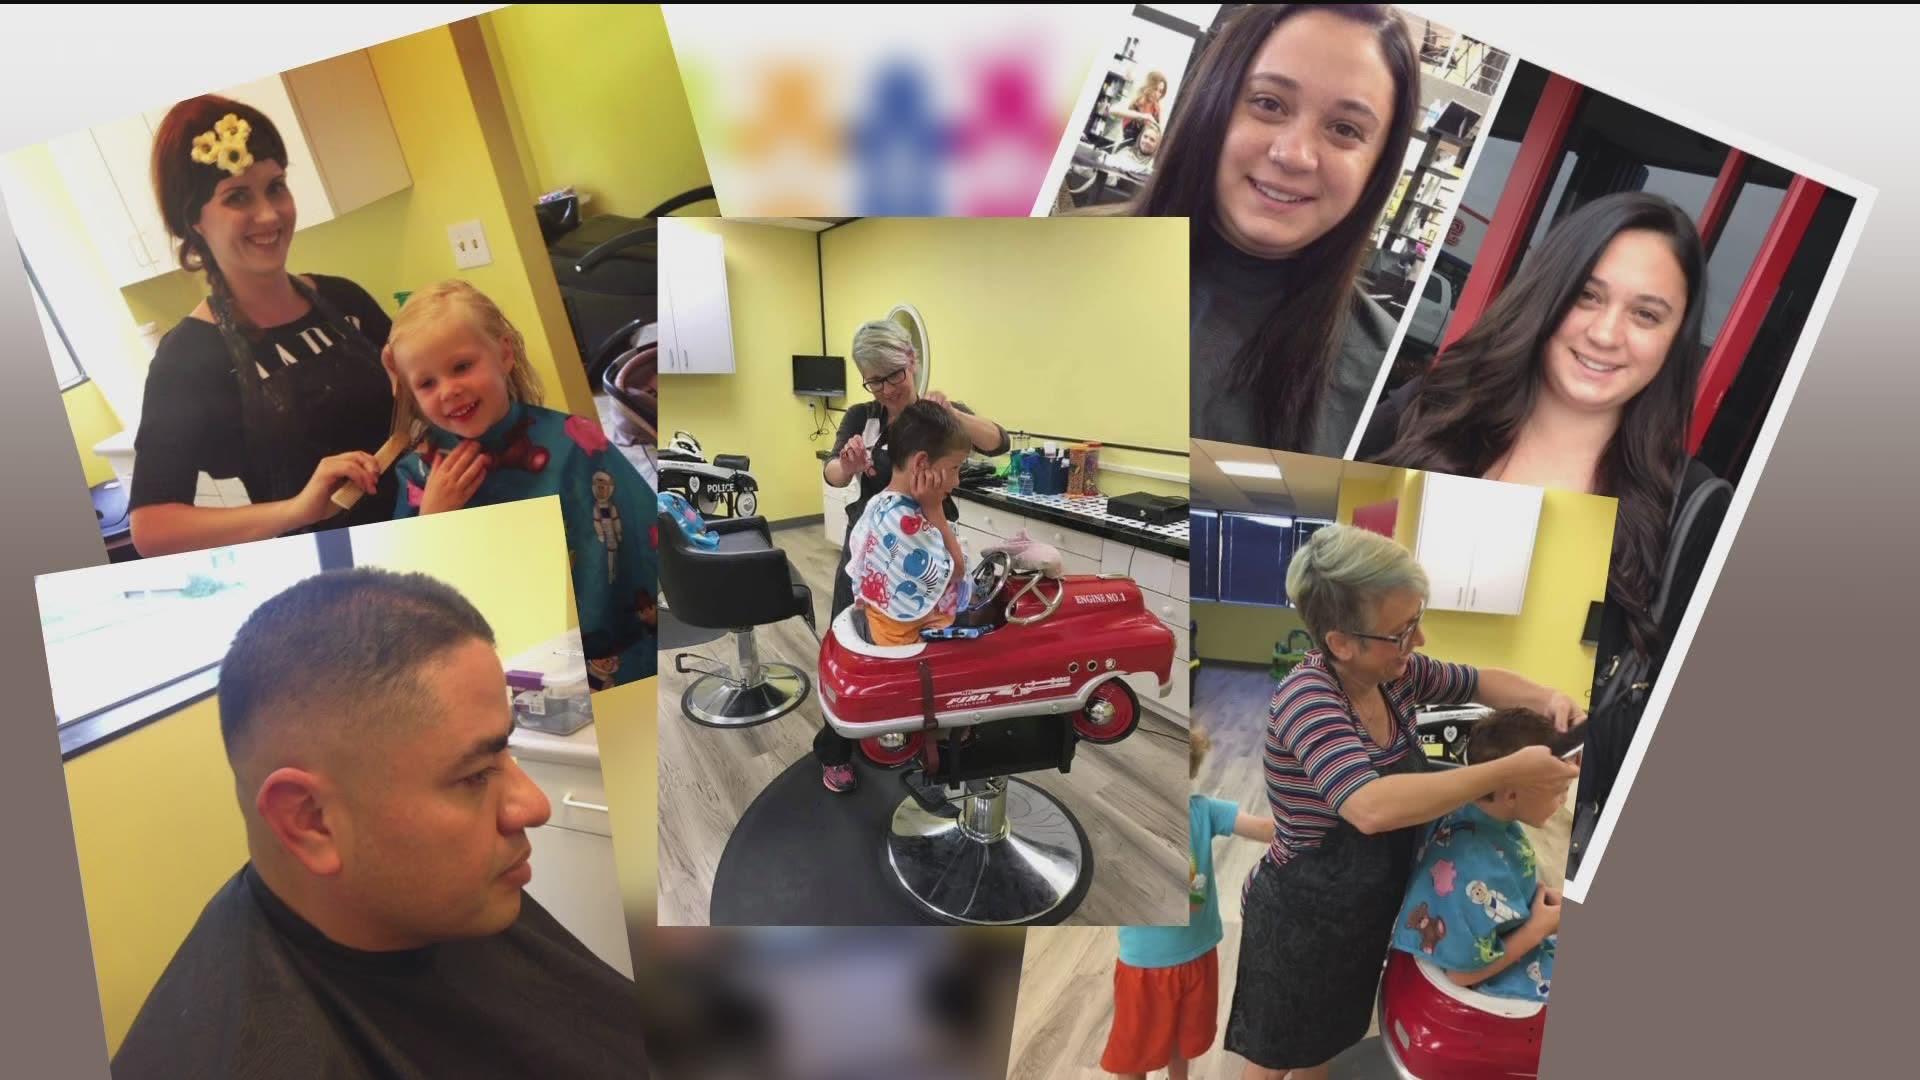 Amy Mullins, owner of tHAIRrapy Hair Salon in San Diego, said her clients with autism and special needs are being left in the dark.